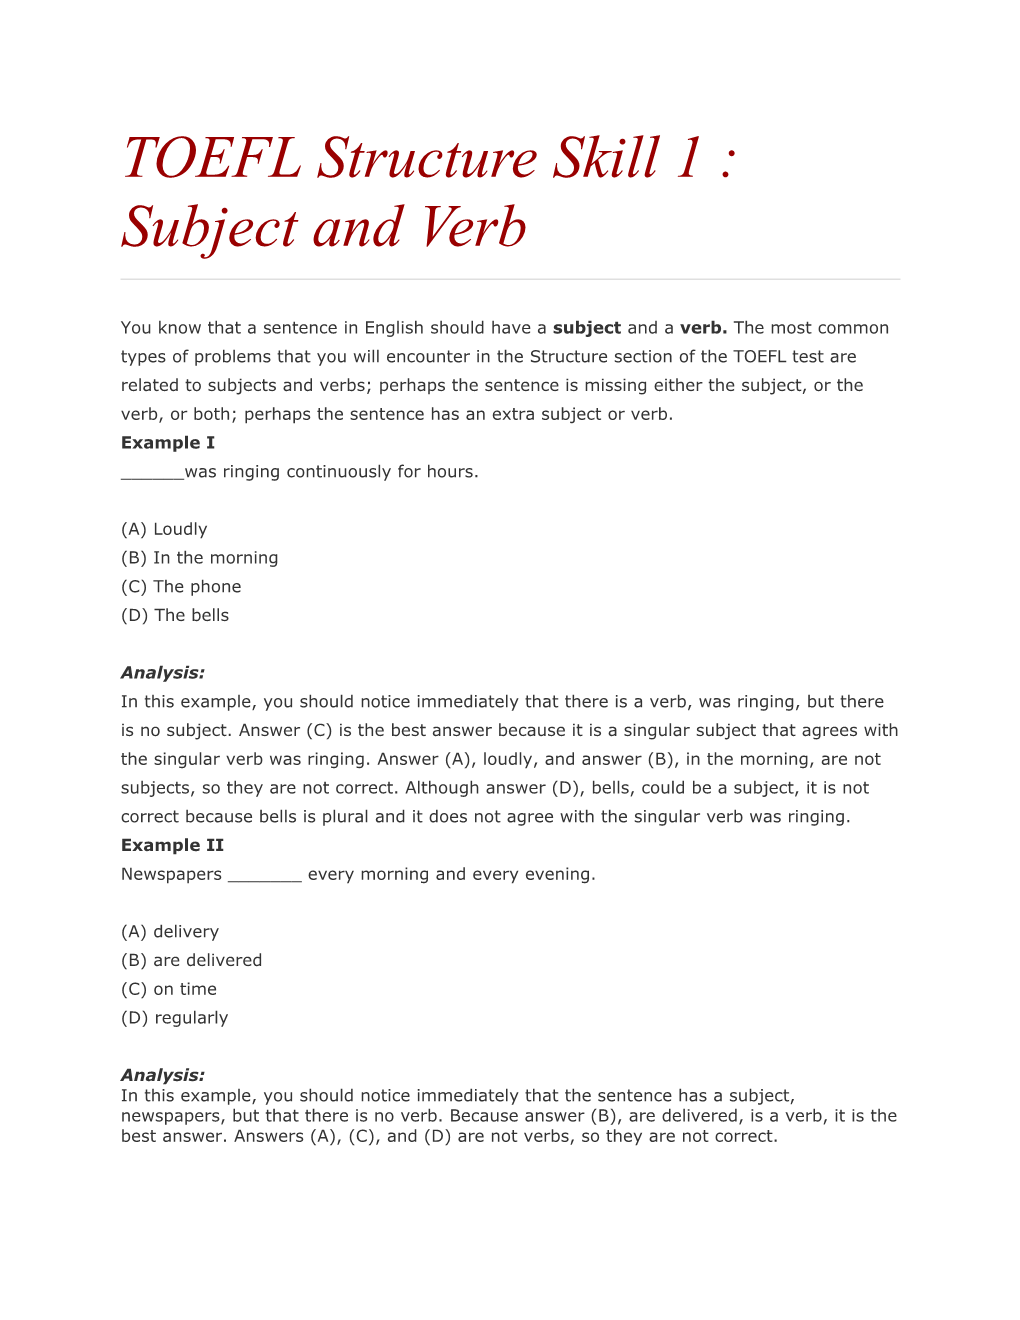 TOEFL Structure Skill 1 : Subject Andverb